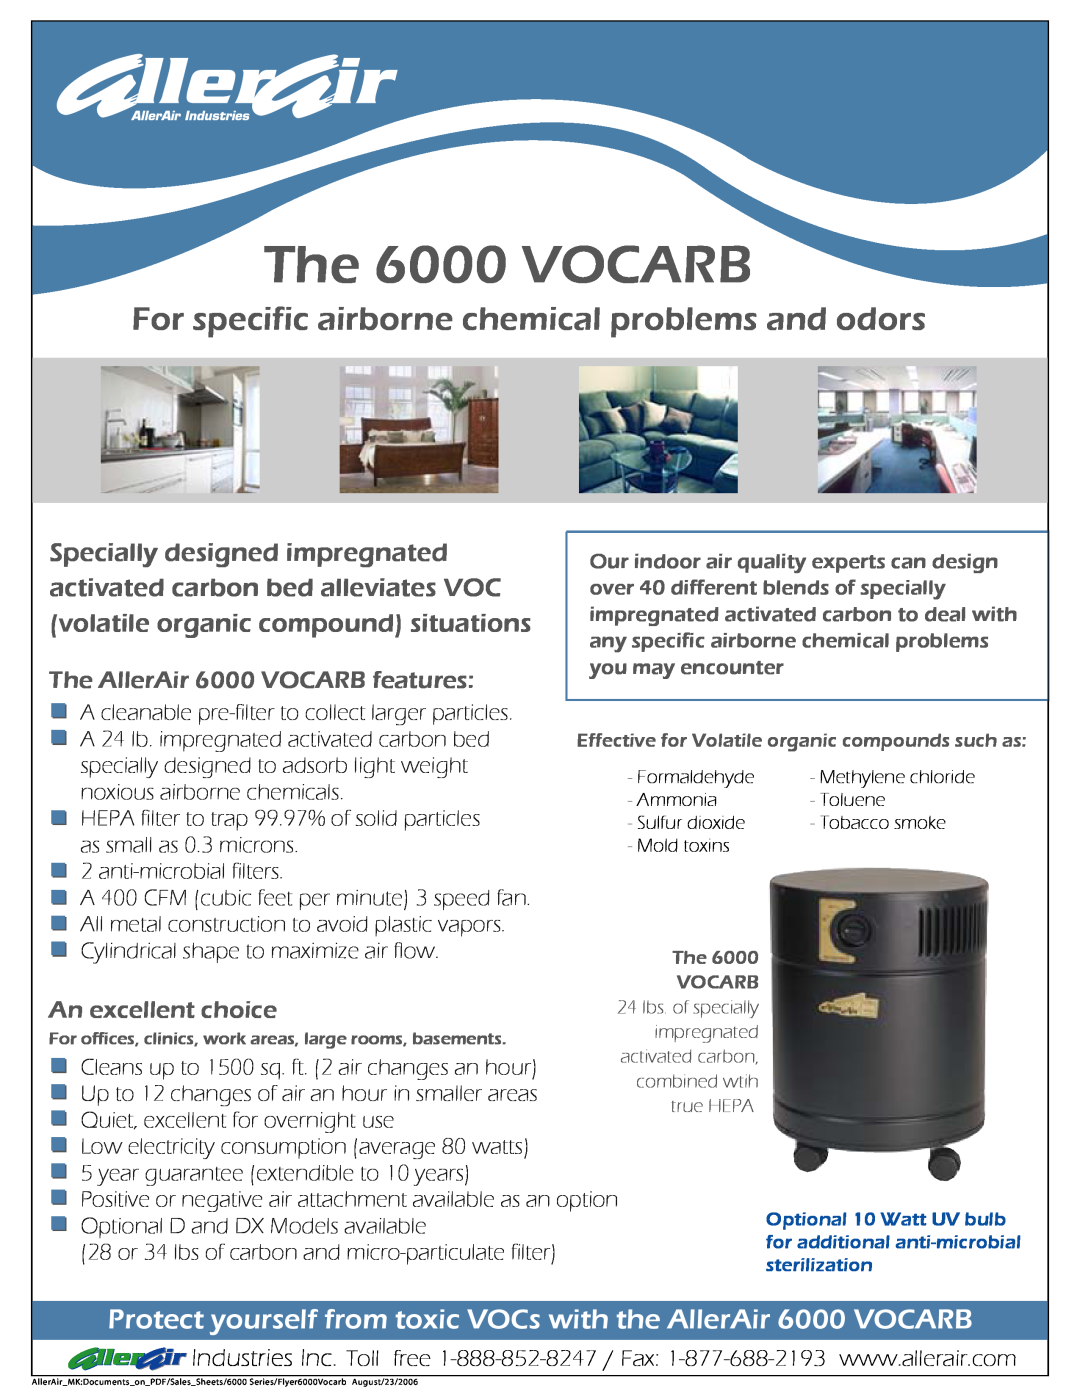 AllerAir manual The AllerAir 6000 VOCARB features, An excellent choice24 lbs. of specially, The 6000 VOCARB 